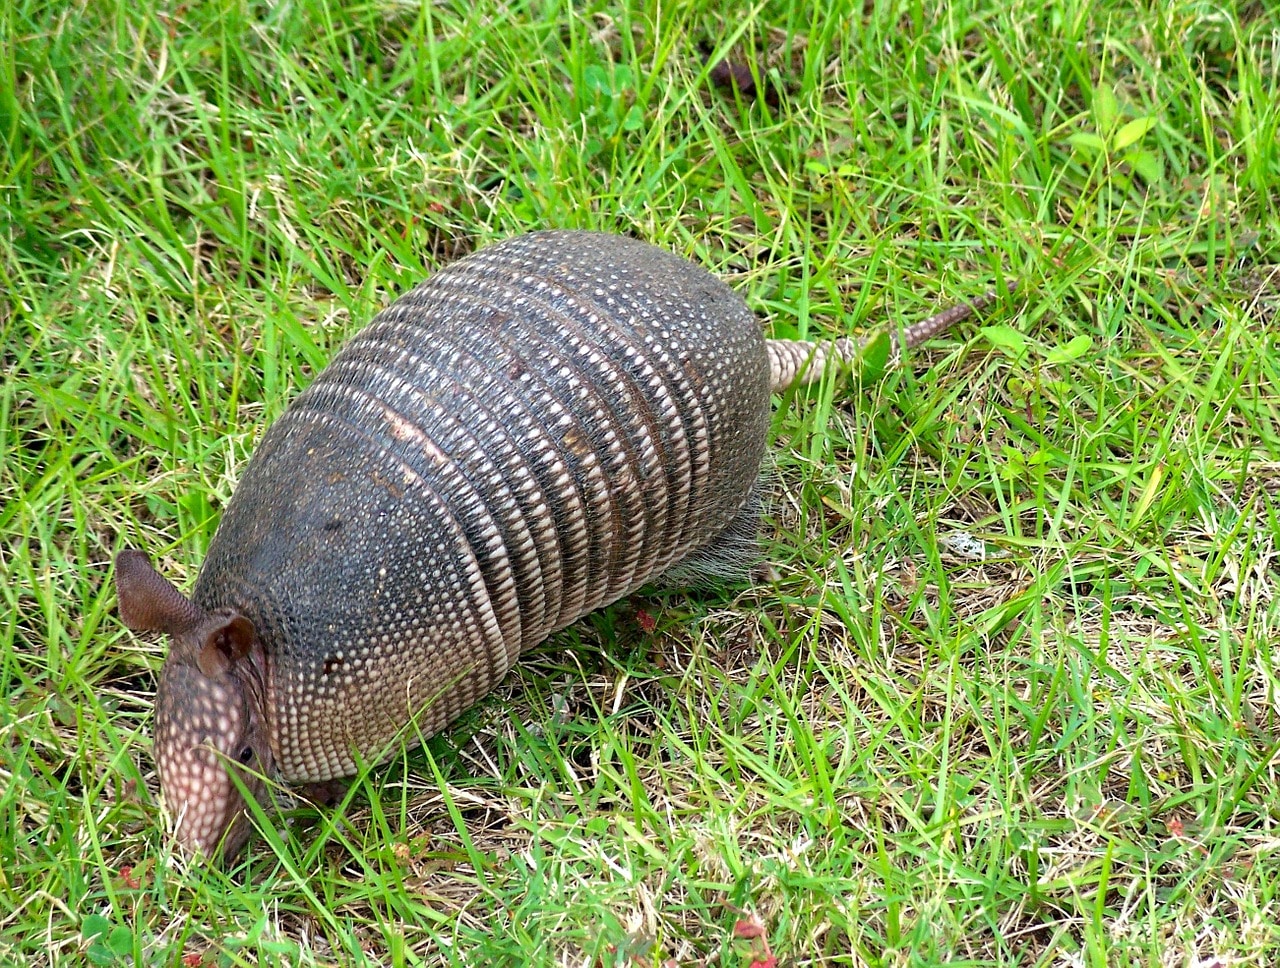 Named Armadillo. I tried all different kinds of bait in my